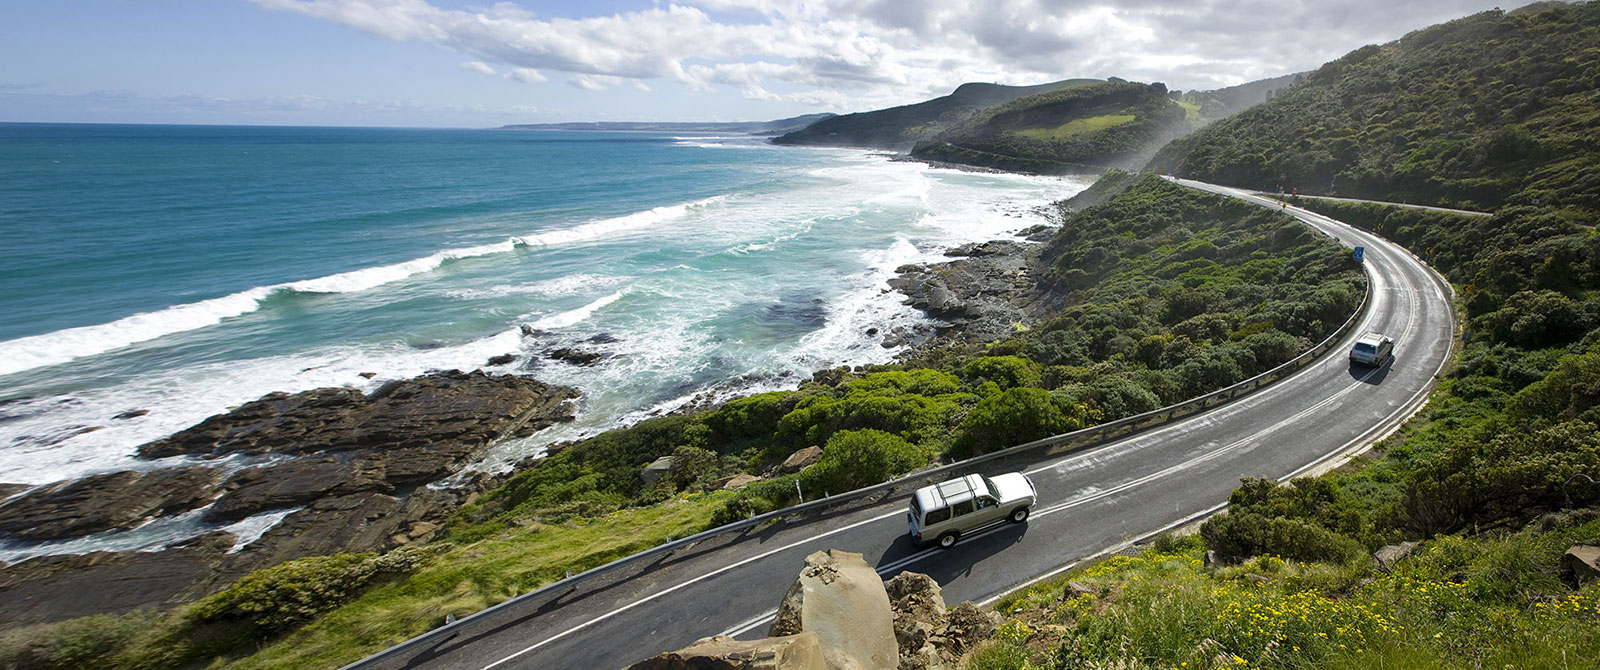 Great Ocean Road Tour - Itinerary for the Great Ocean Road